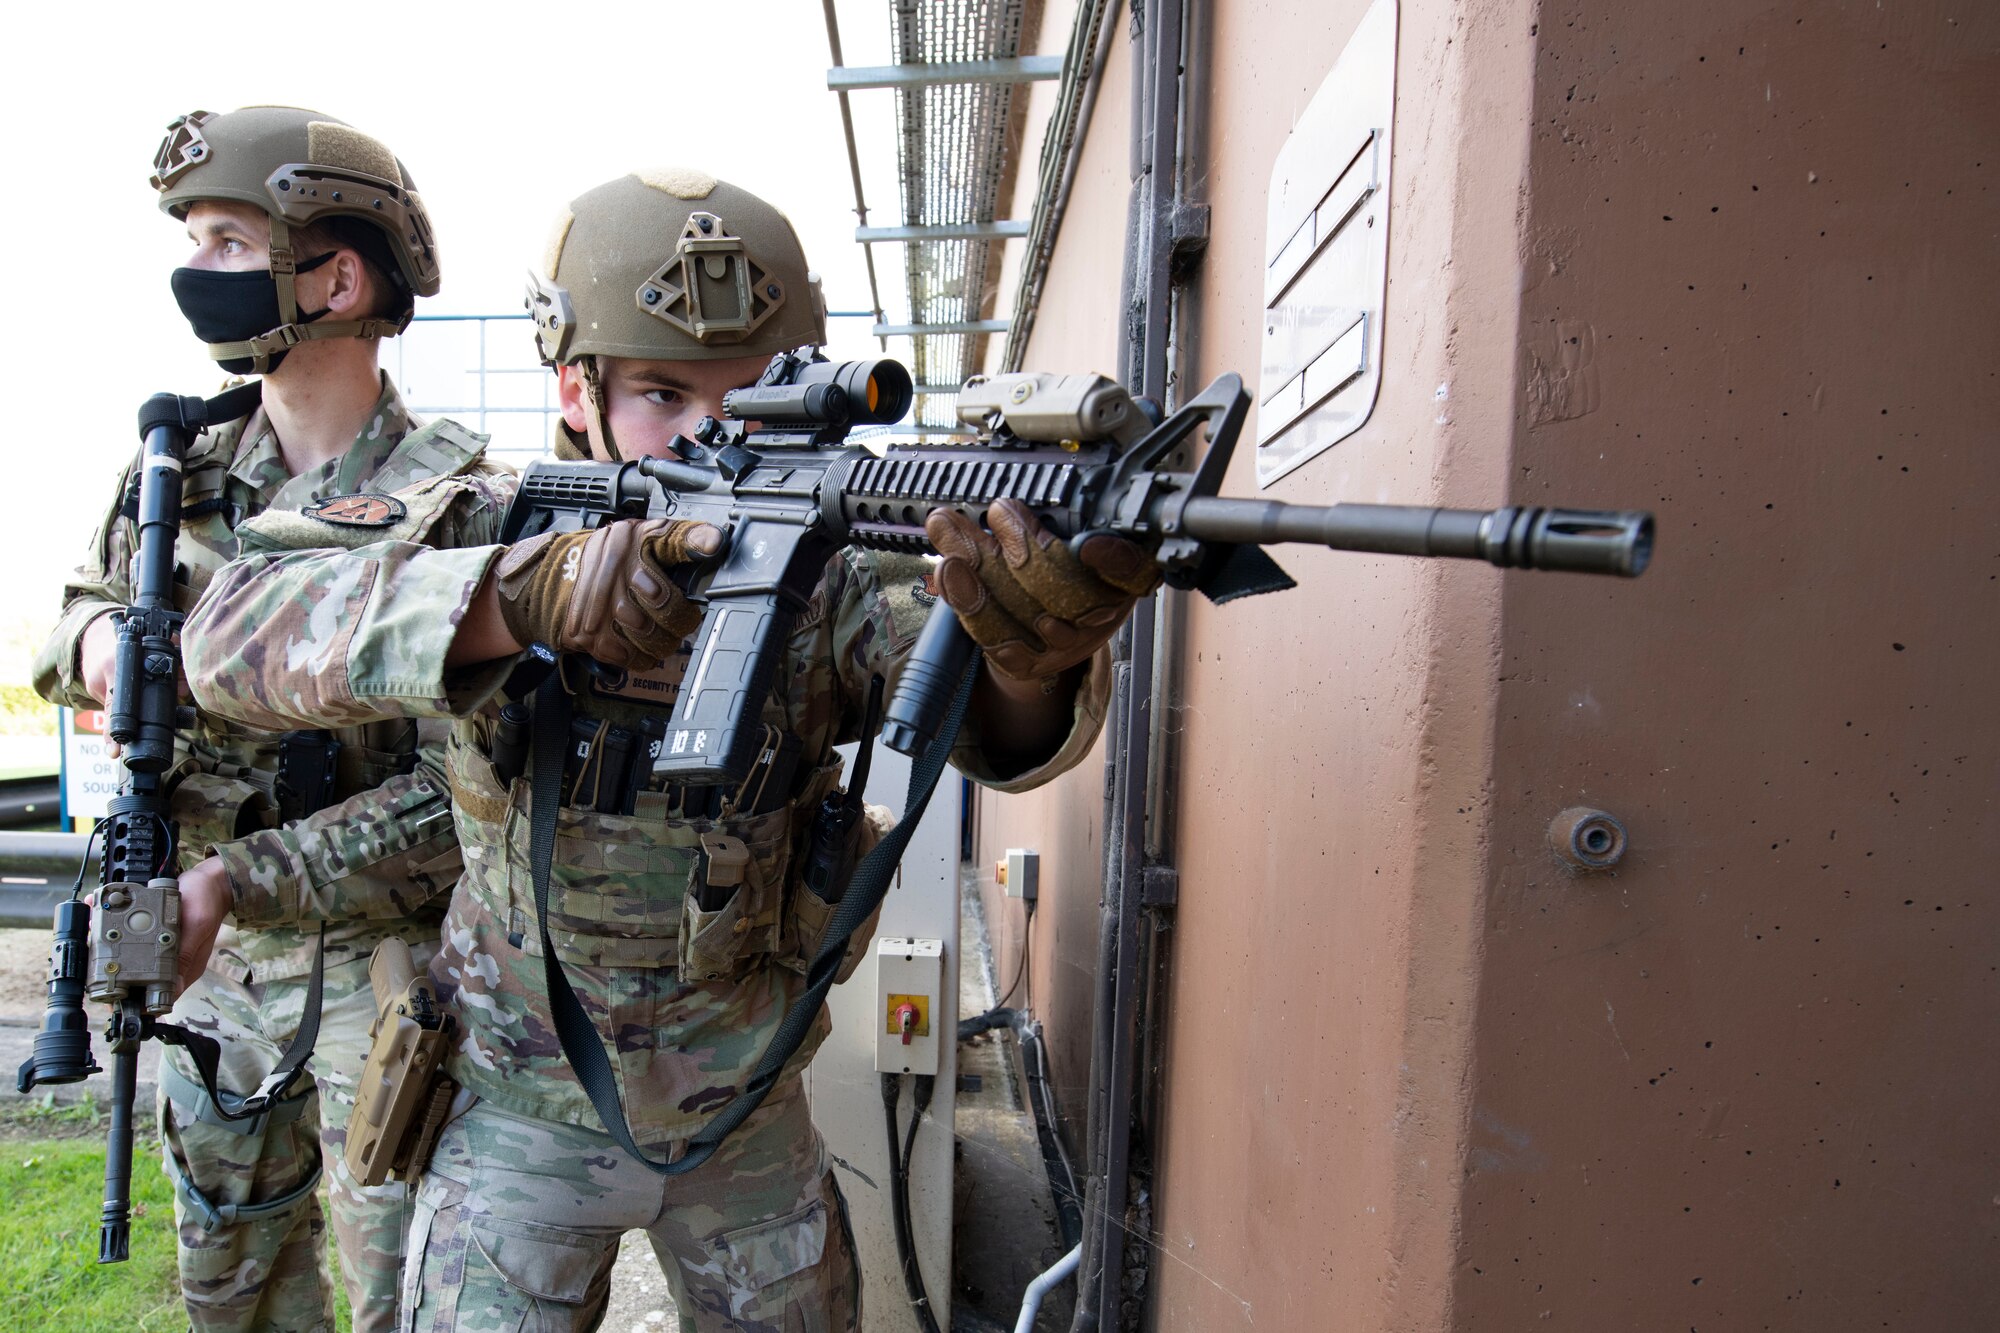 U.S. Air Force Staff Sgt. Derek Ricks, left, and Senior Airman Josten Lacey, right, 423rd Security Forces Squadron (SFS) patrolmen, clear a building during a simulated active shooter training at RAF Molesworth, England, July 28, 2020. 423rd SFS defenders conduct regular training and exercises to ensure mission readiness. (U.S. Air Force photo by Airman 1st Class Jennifer Zima)